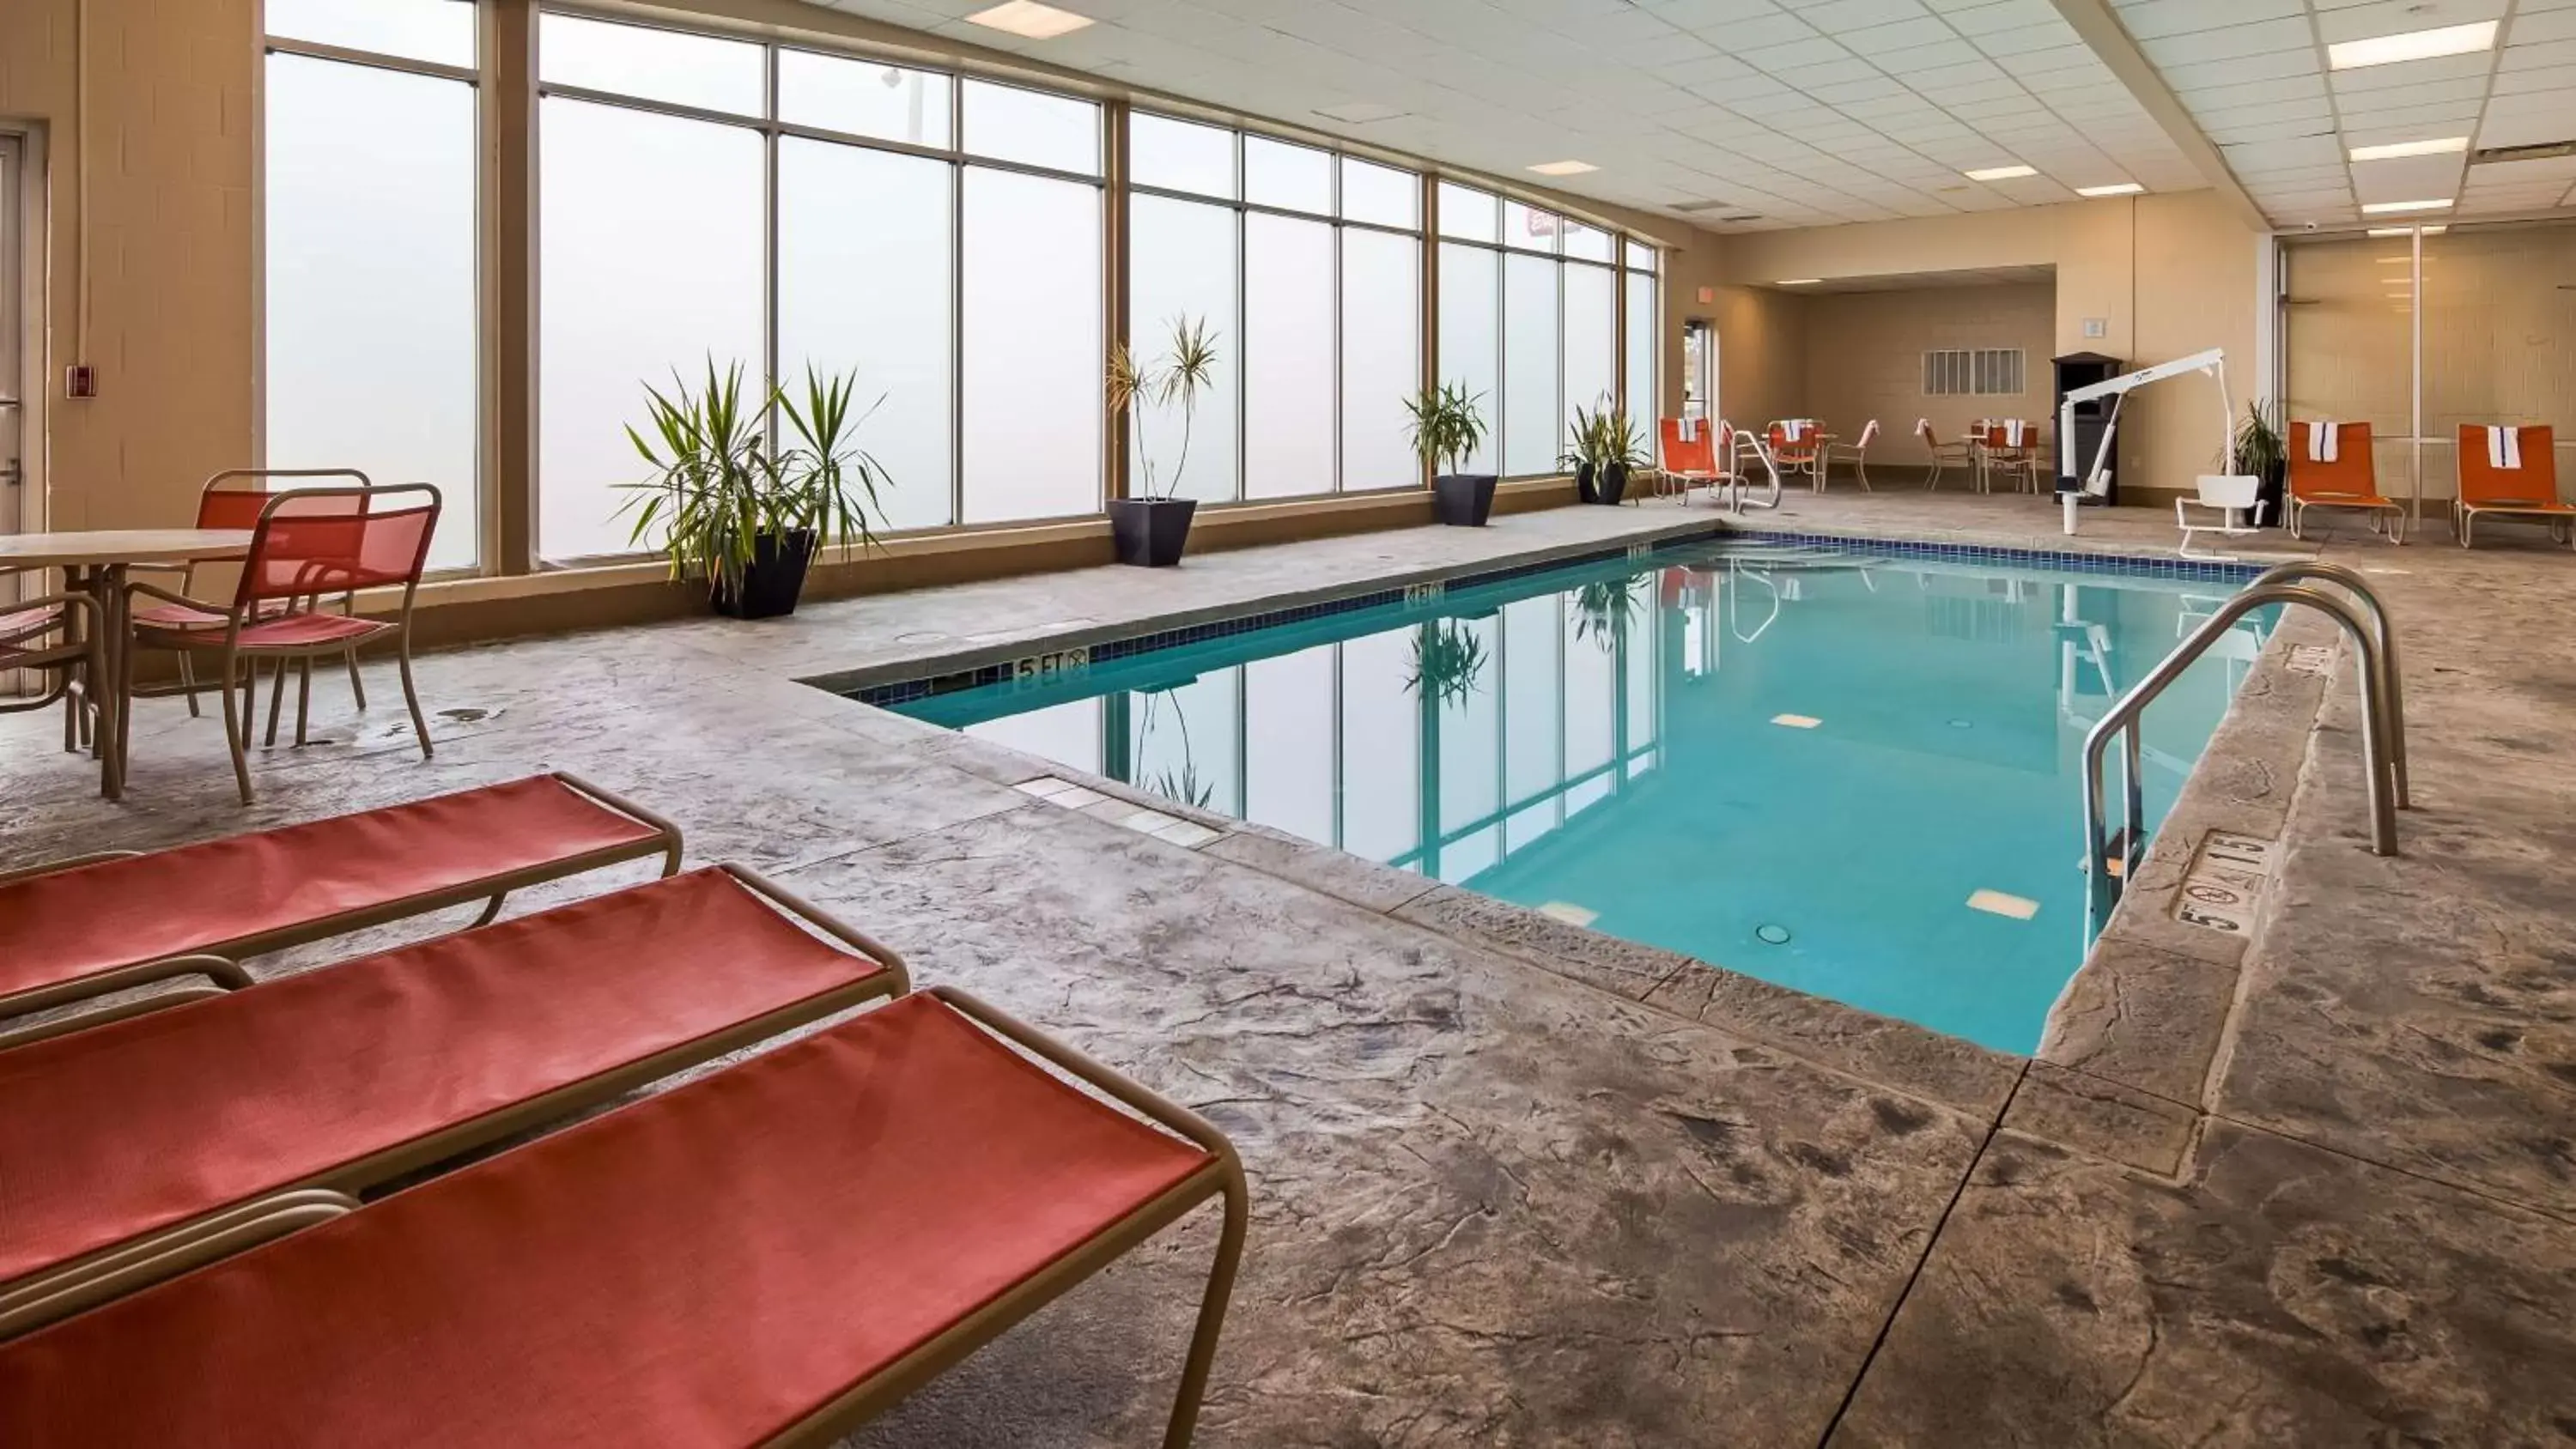 On site, Swimming Pool in Best Western Airport Inn & Suites Cleveland